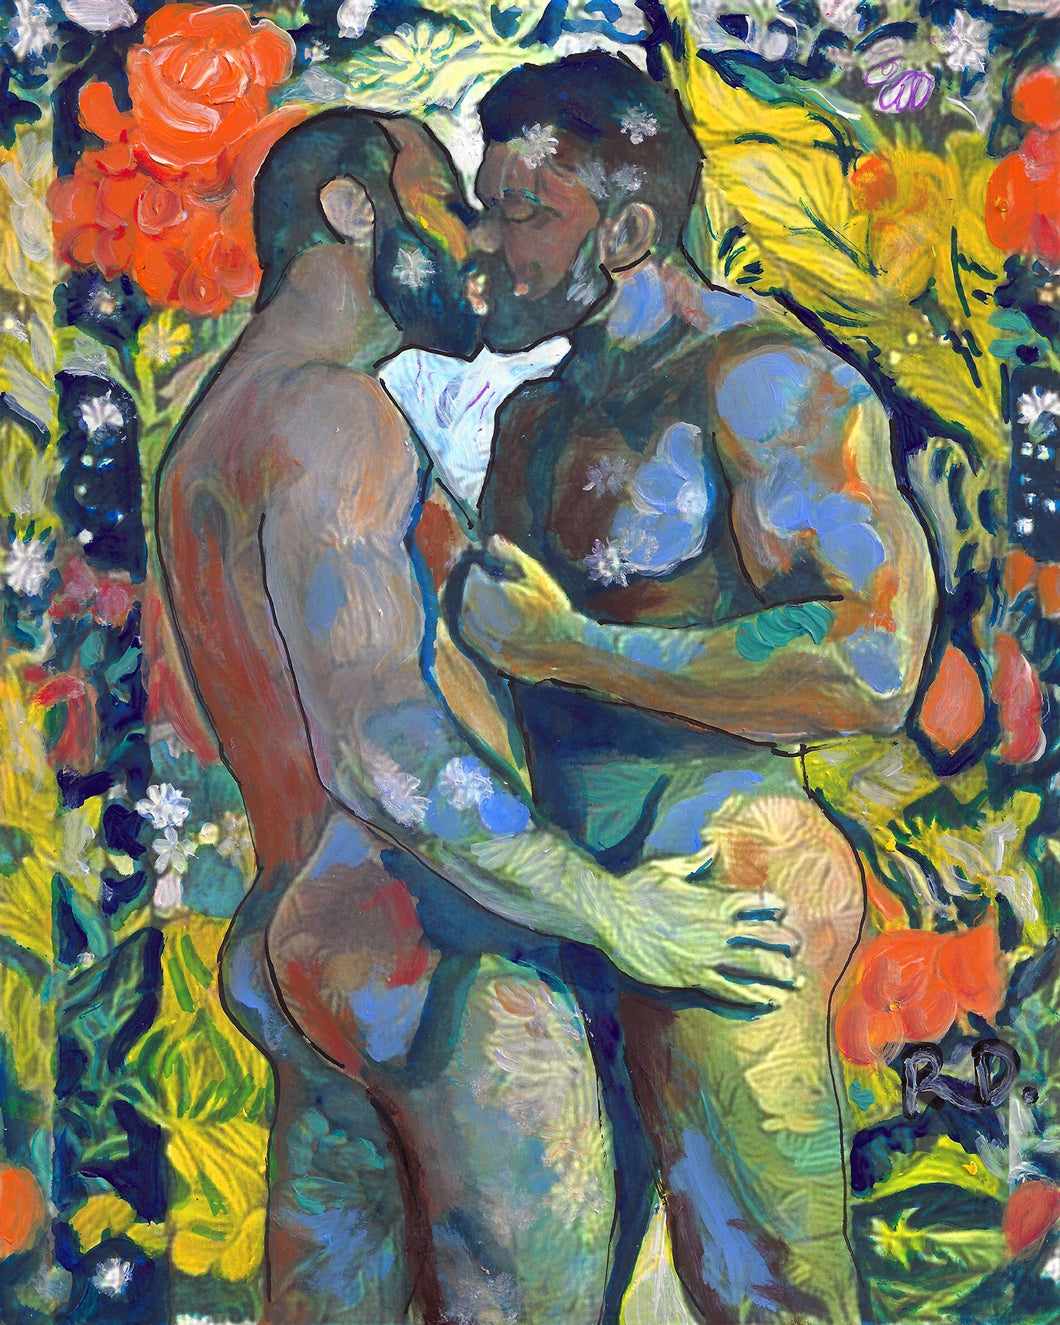 Afterwards - A Kiss.  Artist Proof - Limited Edition Homoerotic Flower Bear by RD Riccoboni